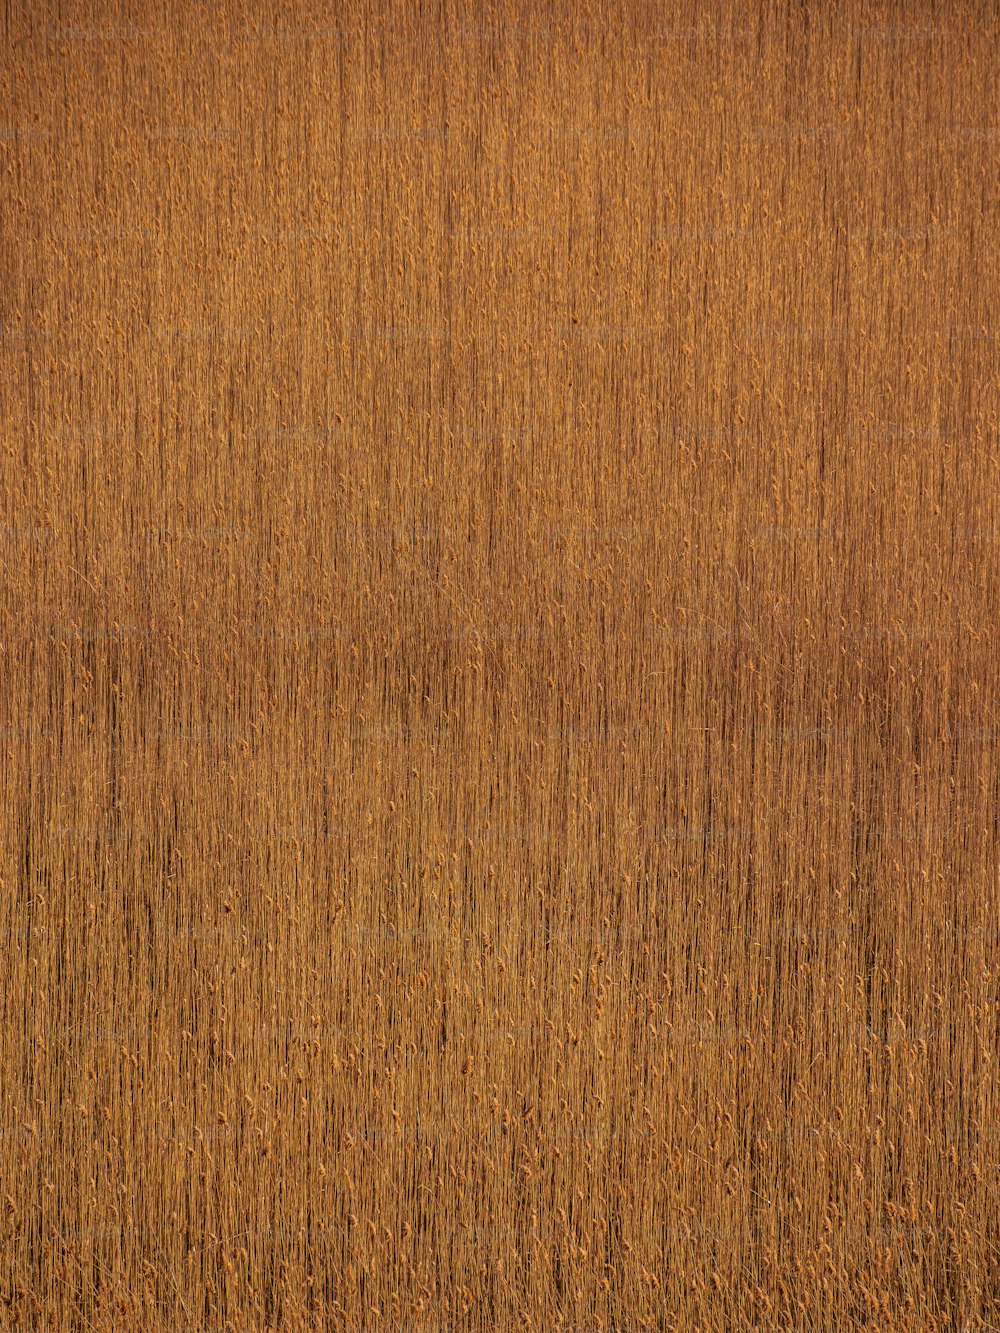 a wooden surface with a brown color